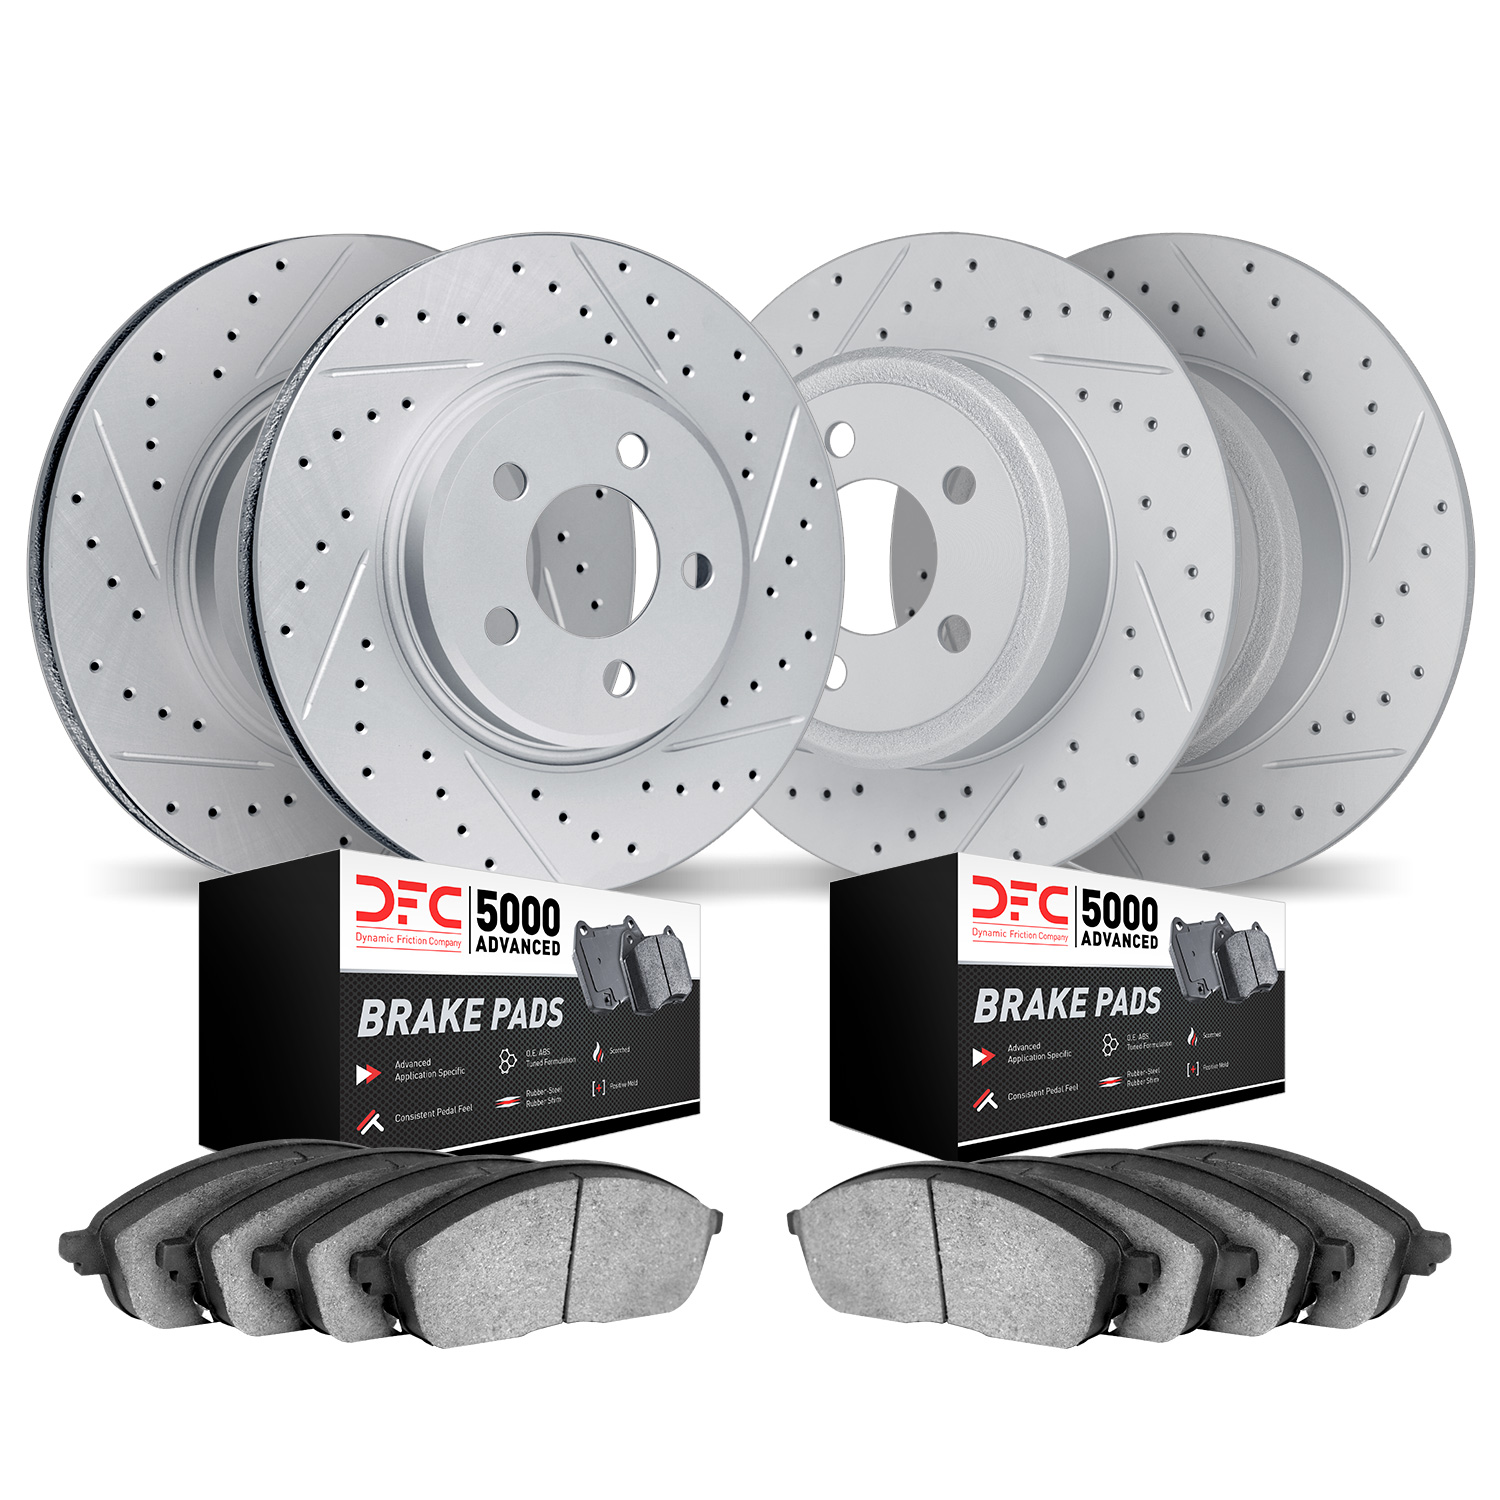 2504-76102 Geoperformance Drilled/Slotted Rotors w/5000 Advanced Brake Pads Kit, 2002-2003 Lexus/Toyota/Scion, Position: Front a